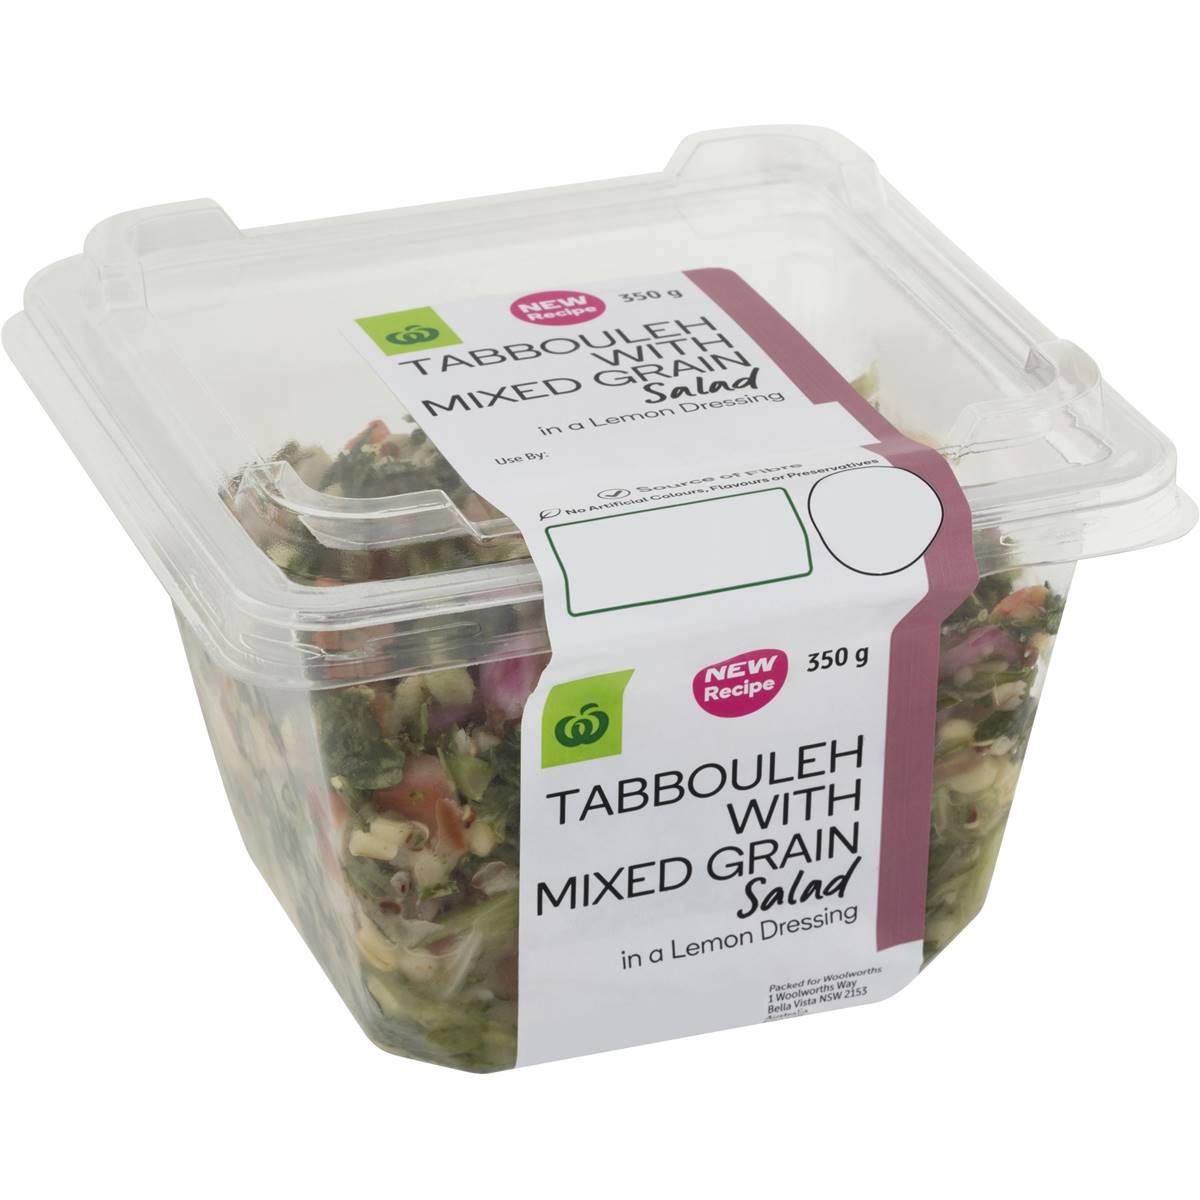 Calories in Woolworths Tabbouleh With Mixed Grain Salad